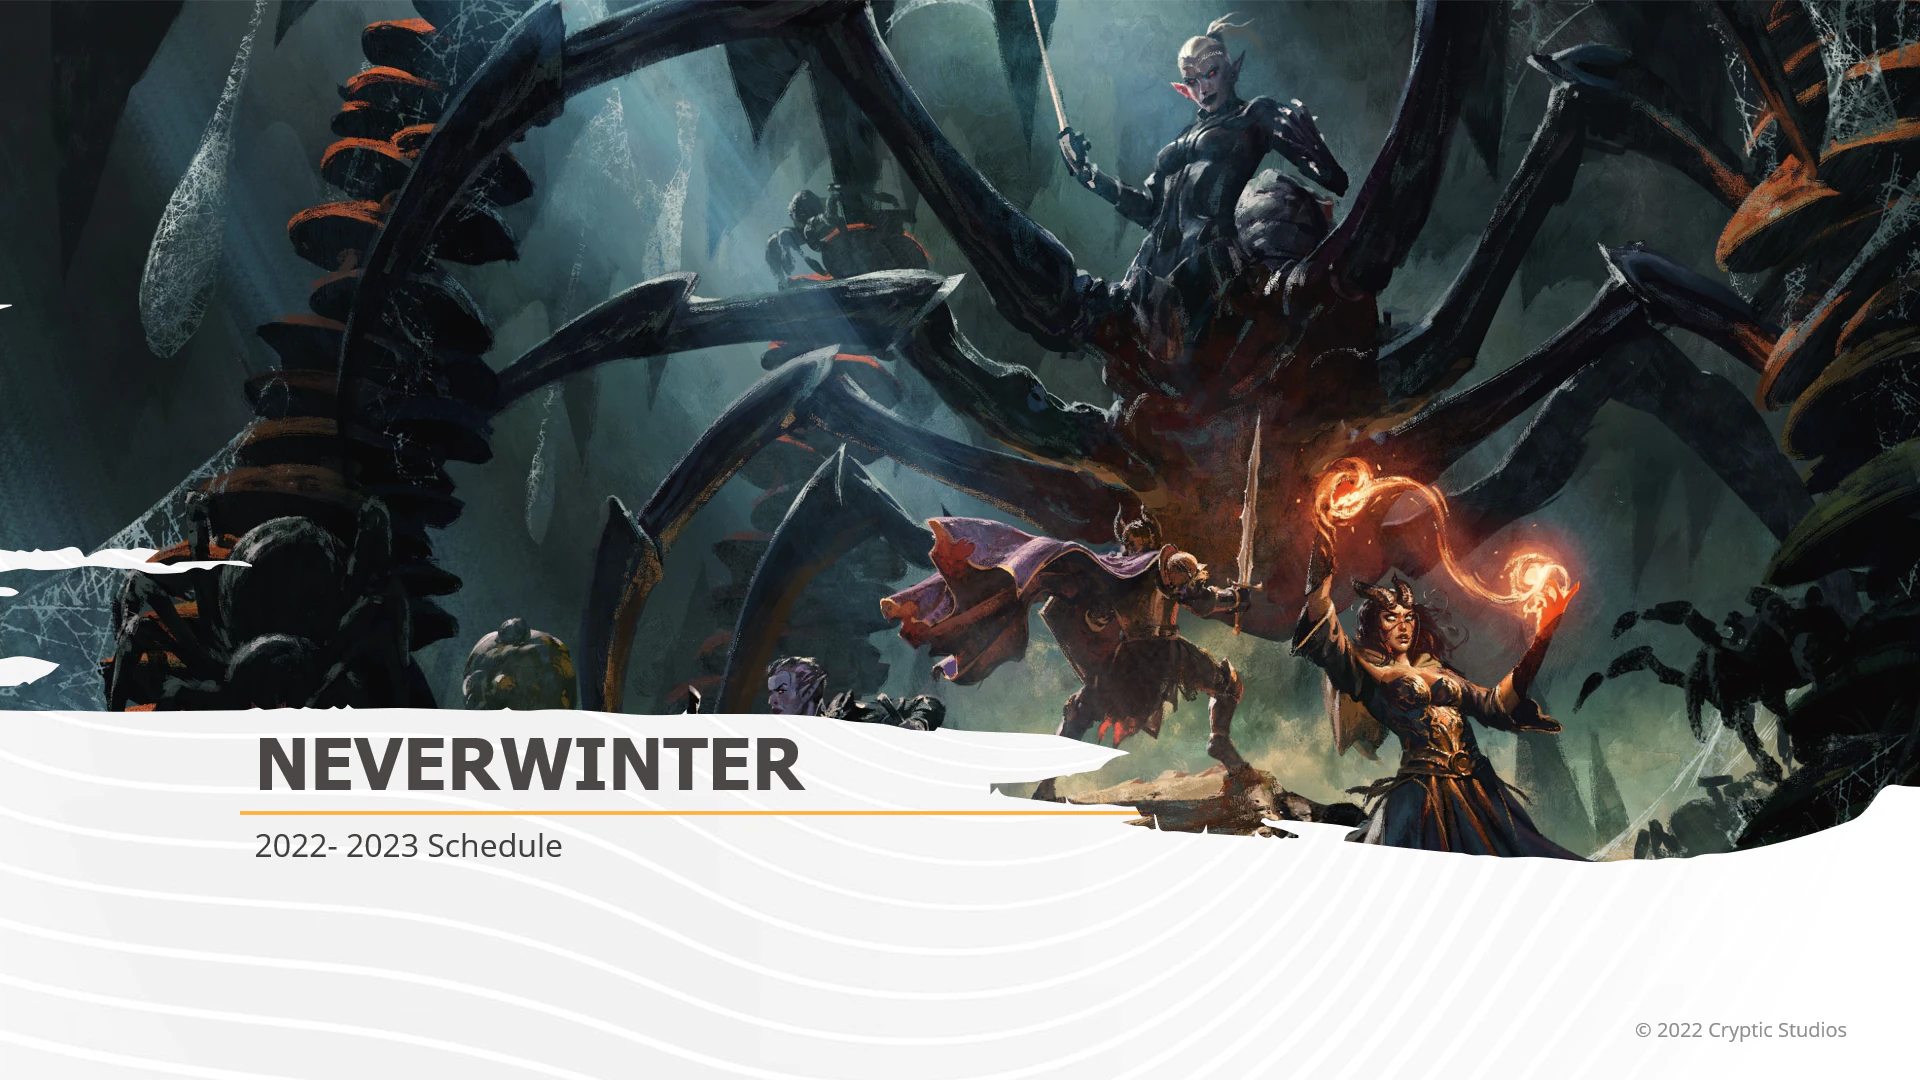 Neverwinter Recaps Last Month’s Q&A Stream, Shares Roadmap With Plans for 2023